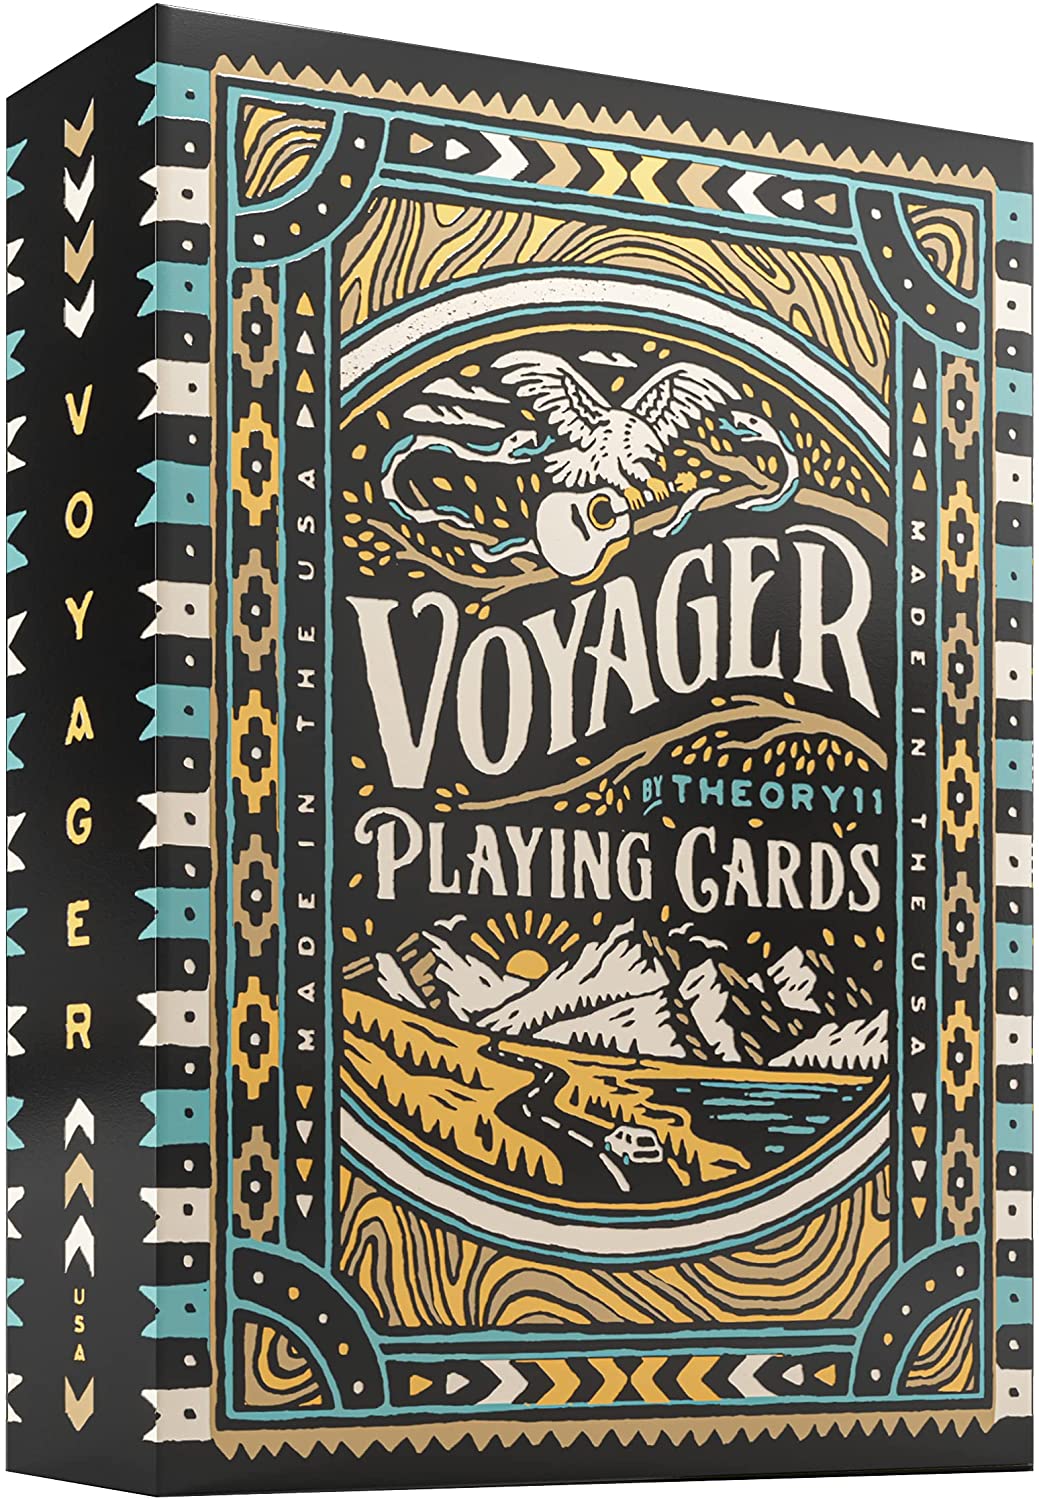 theory11 Playing Cards: Voyager